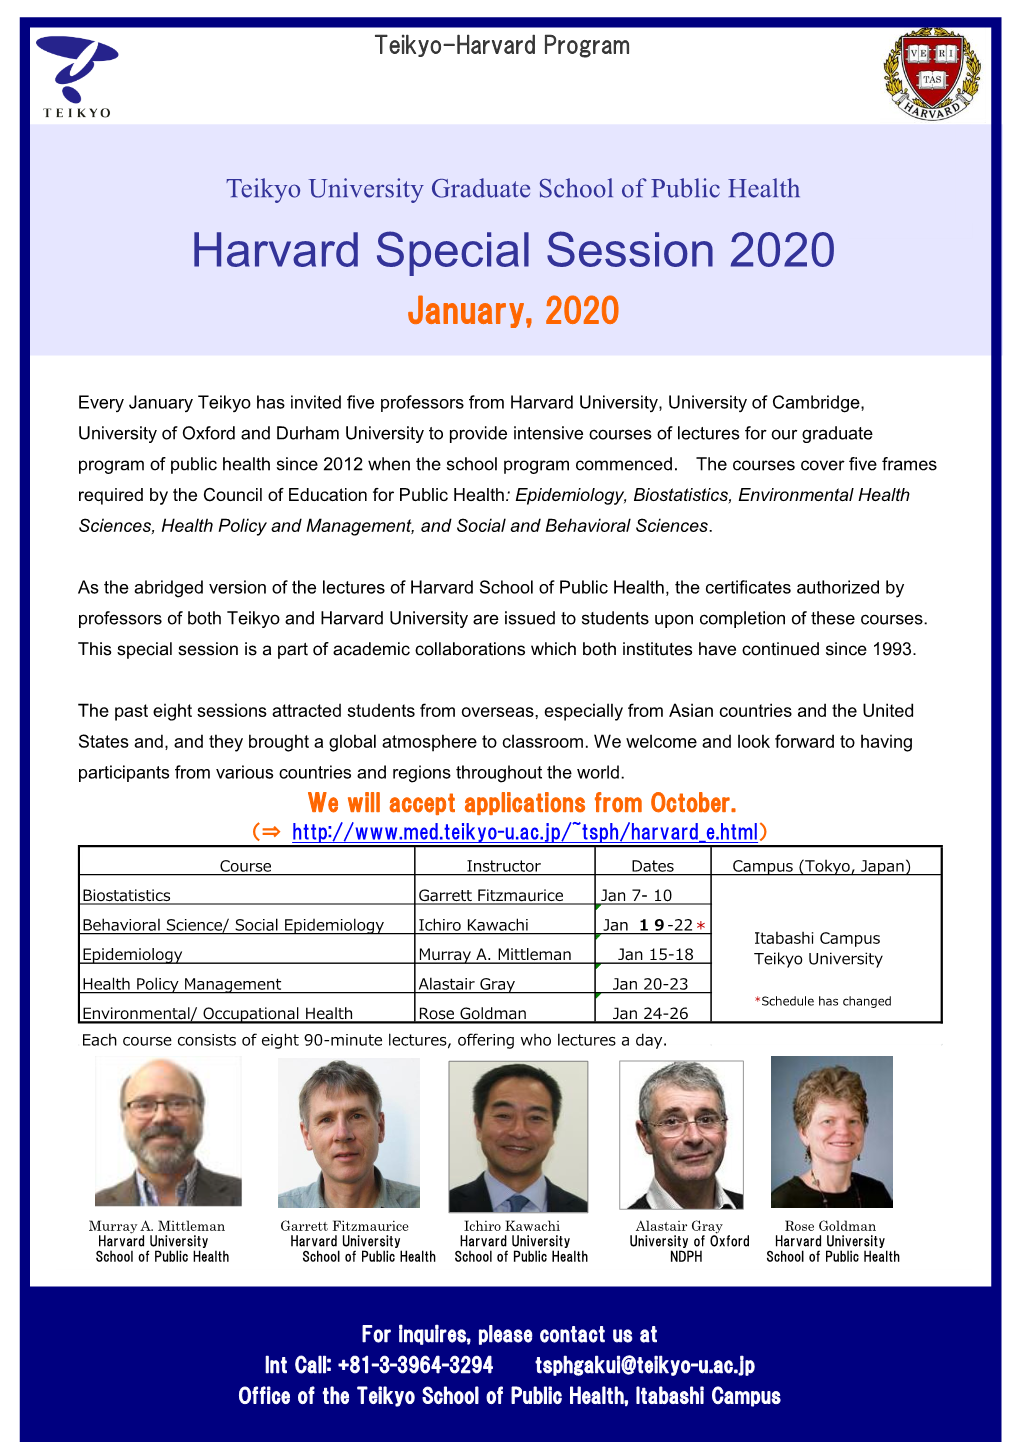 Harvard Special Session 2020